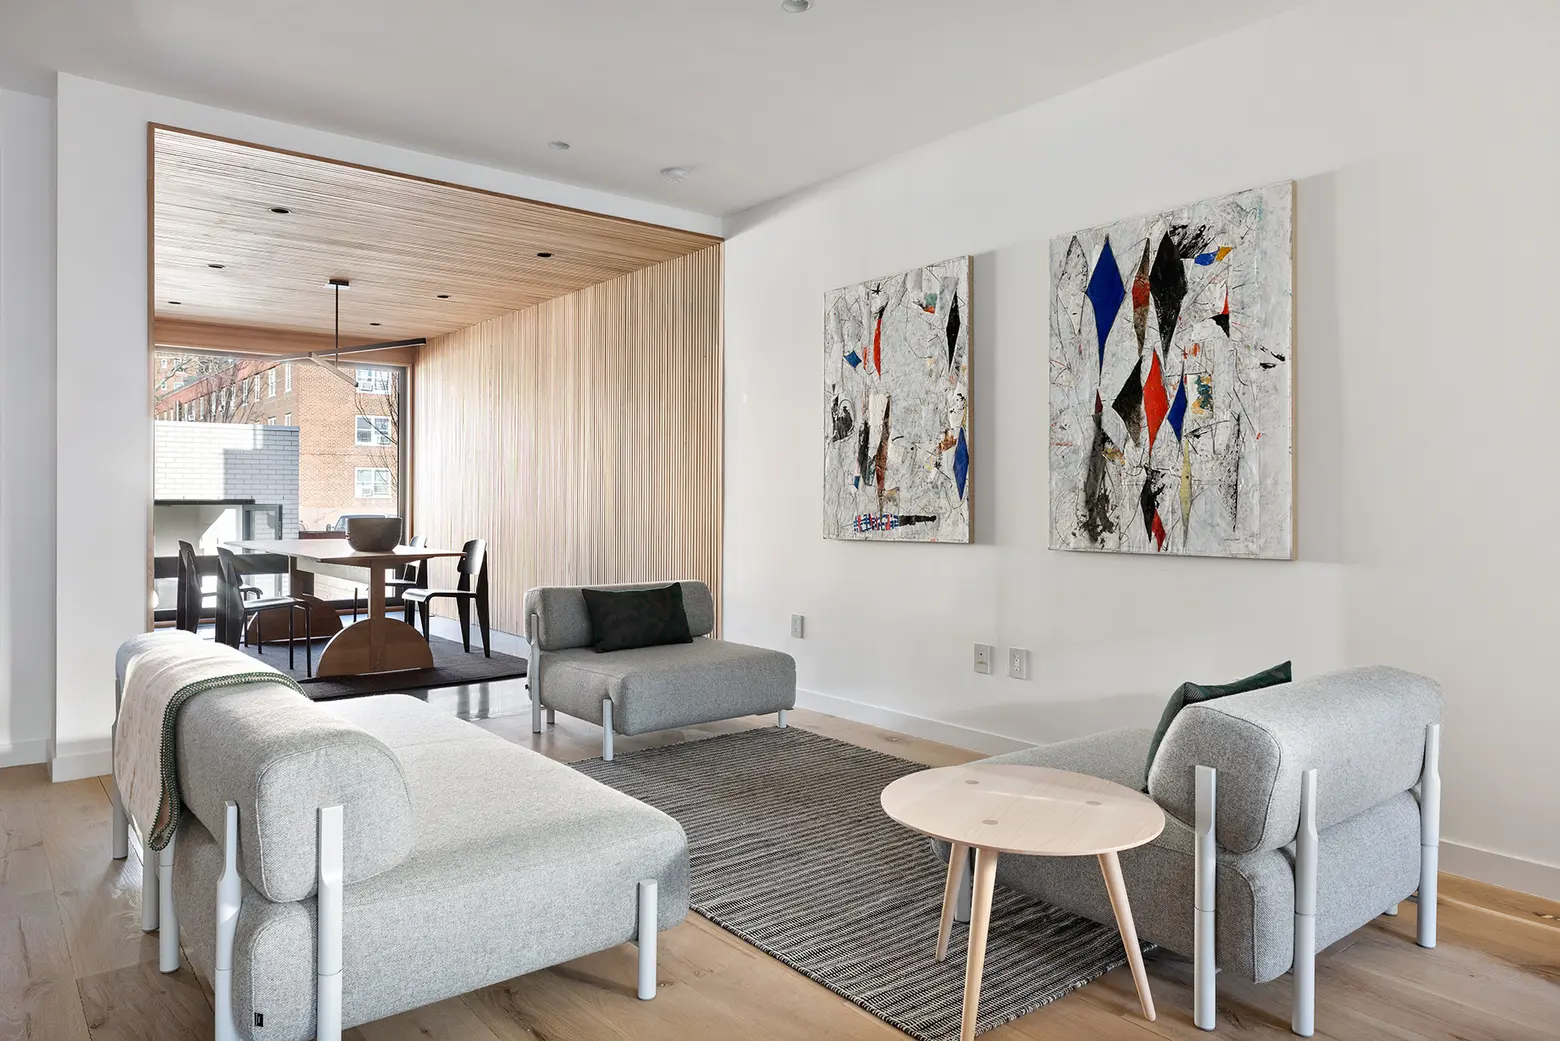 This $2.5M Red Hook townhouse gets sustainable modernism right